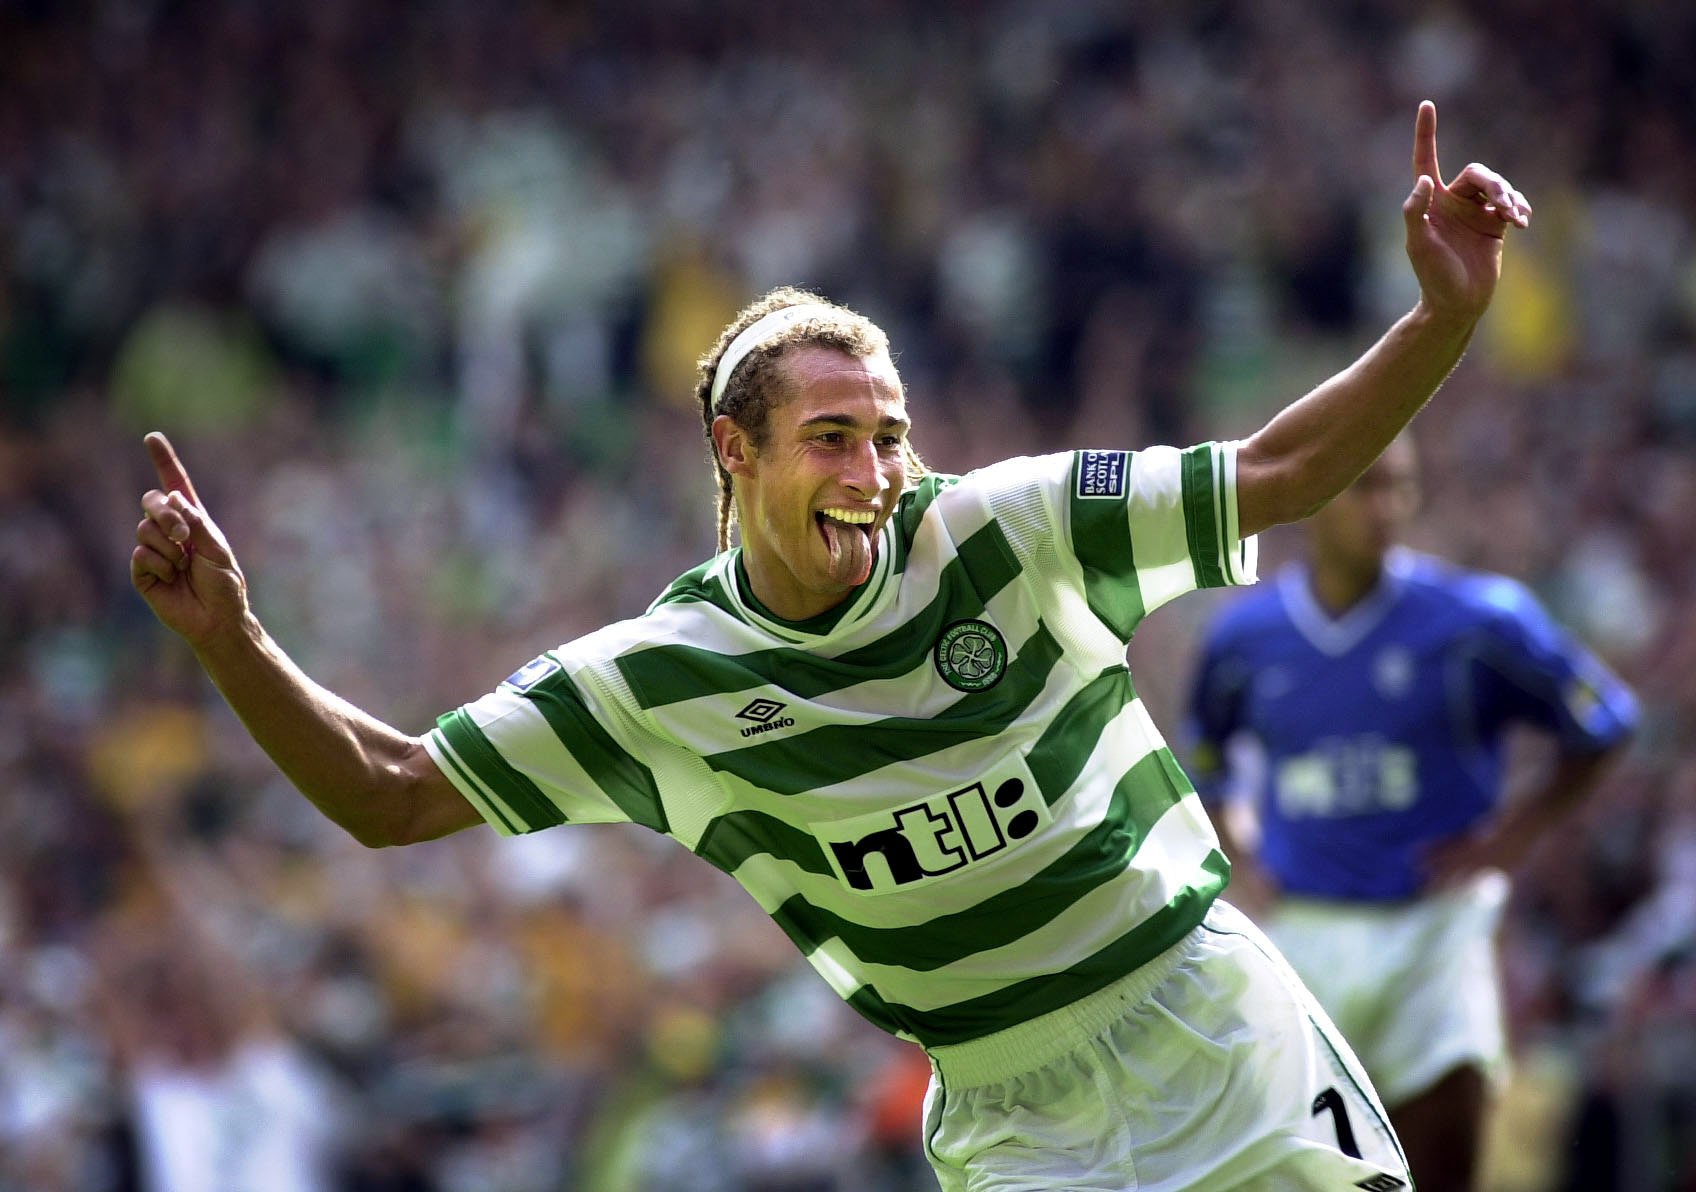 WATCH: Henrik Larsson Features In Question On Game Show Pointless